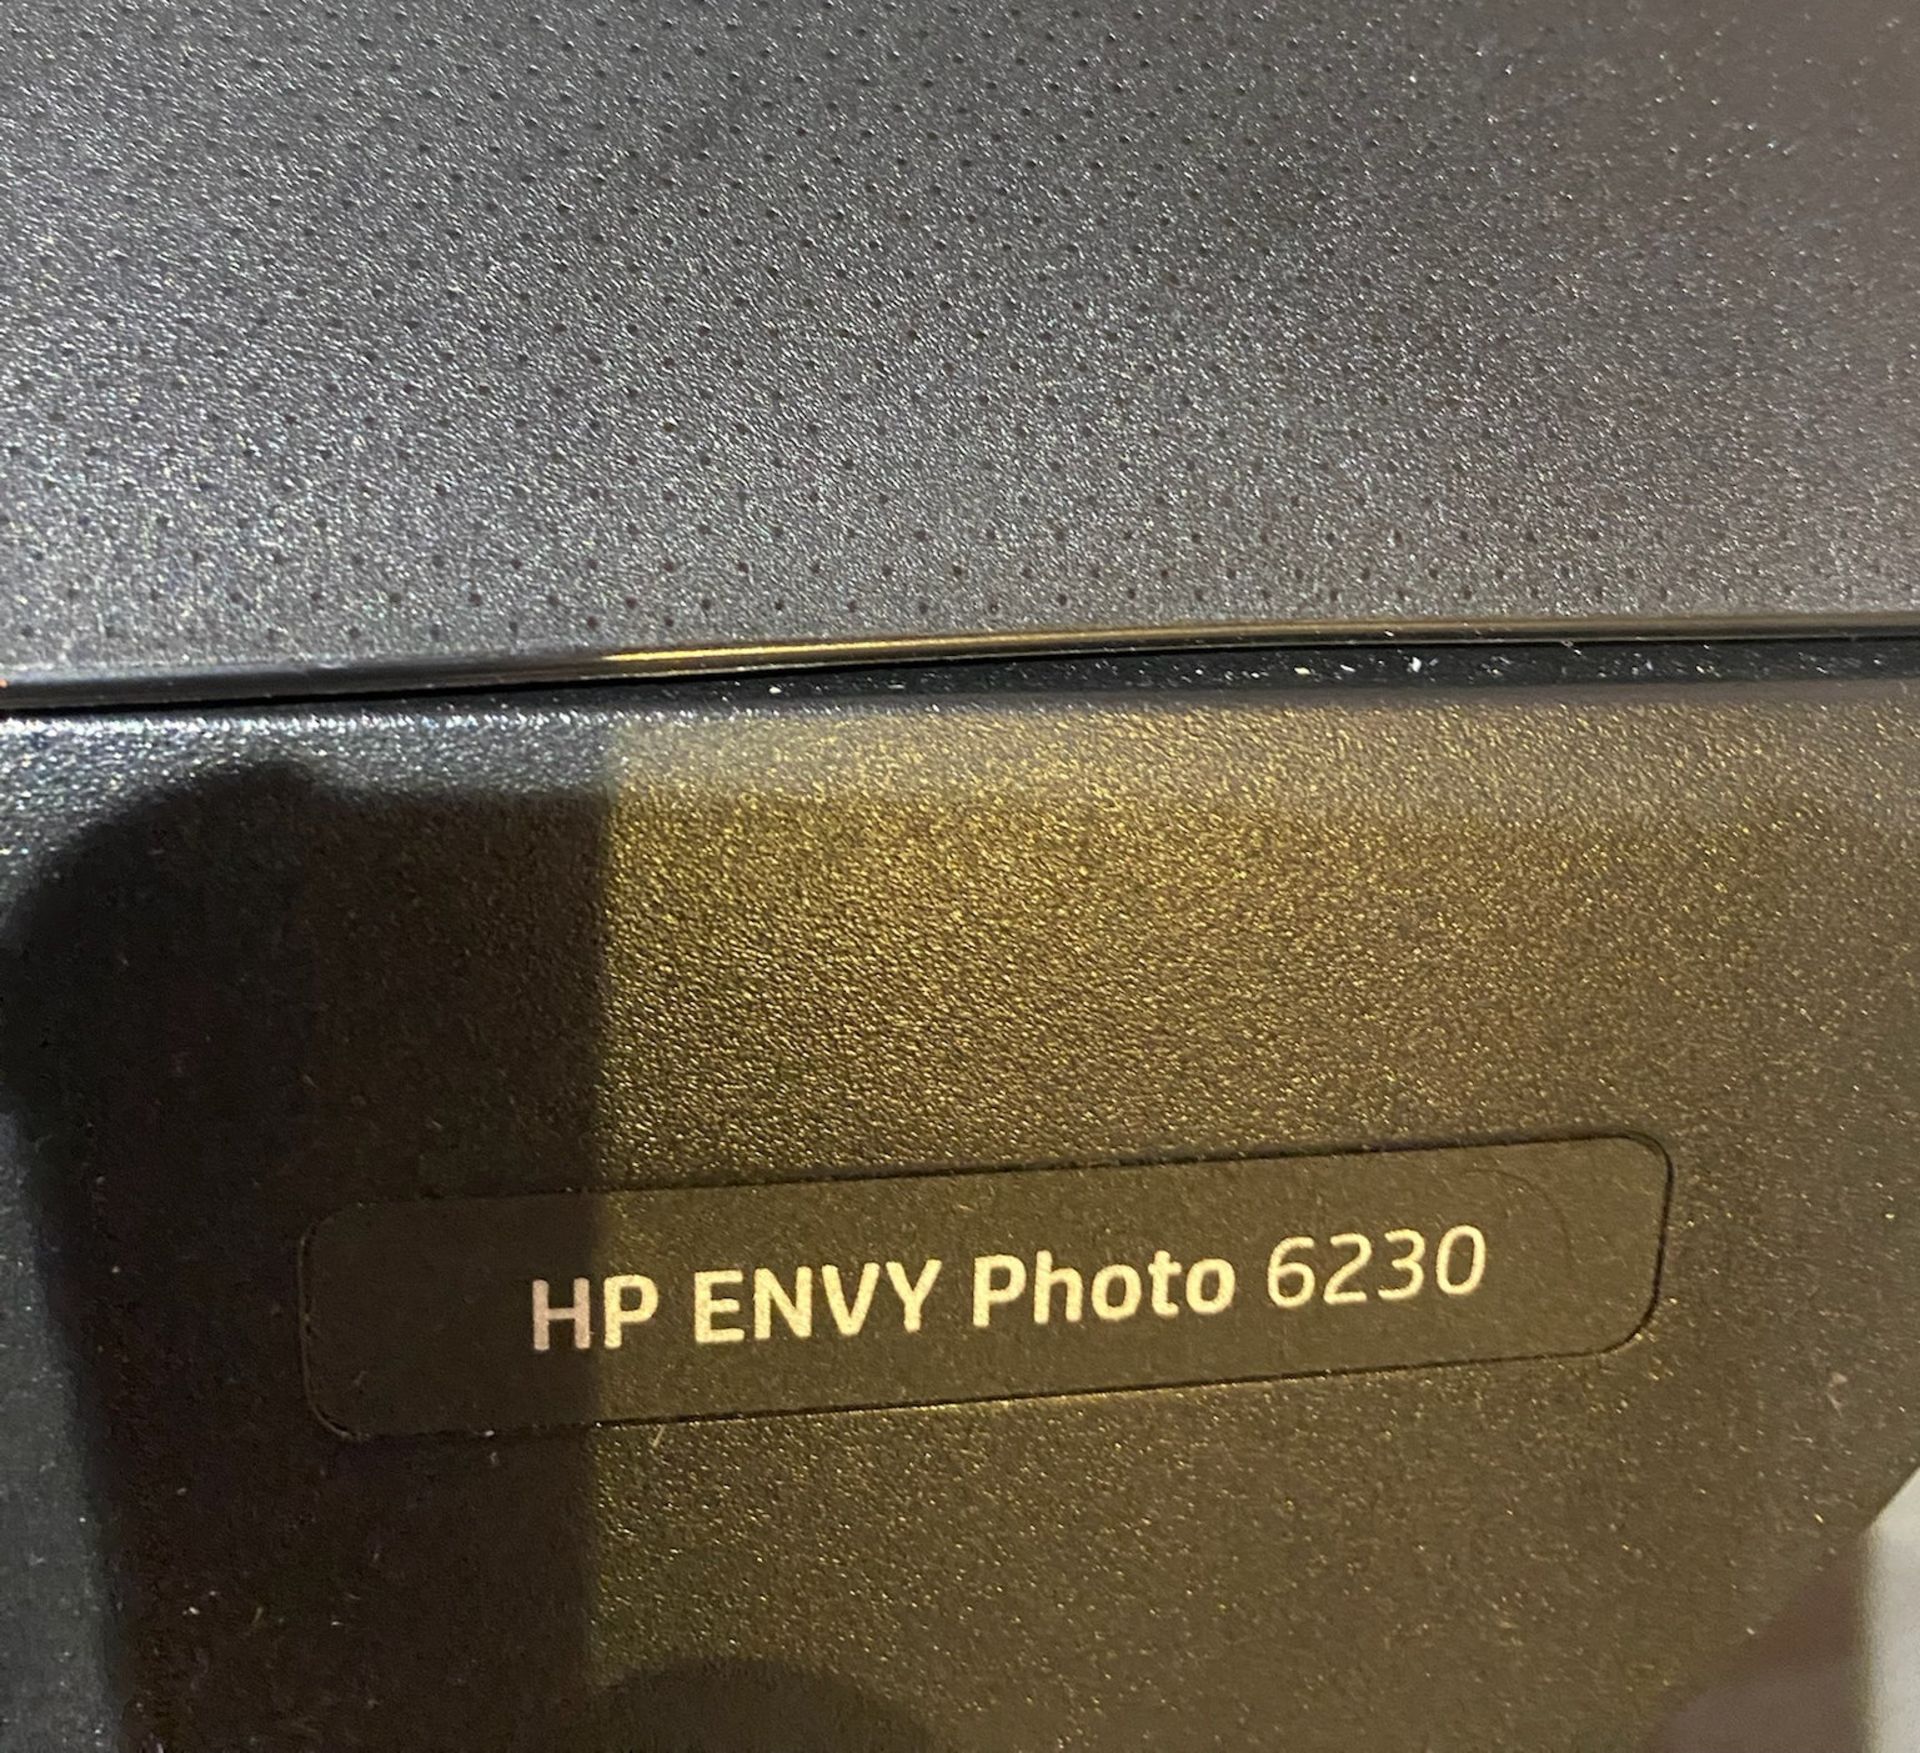 1 x Hp Envy Photo 6230 All-In-One Printer - Ref: BGC048 - CL807 - Covent Garden, LondonFrom a - Image 2 of 2